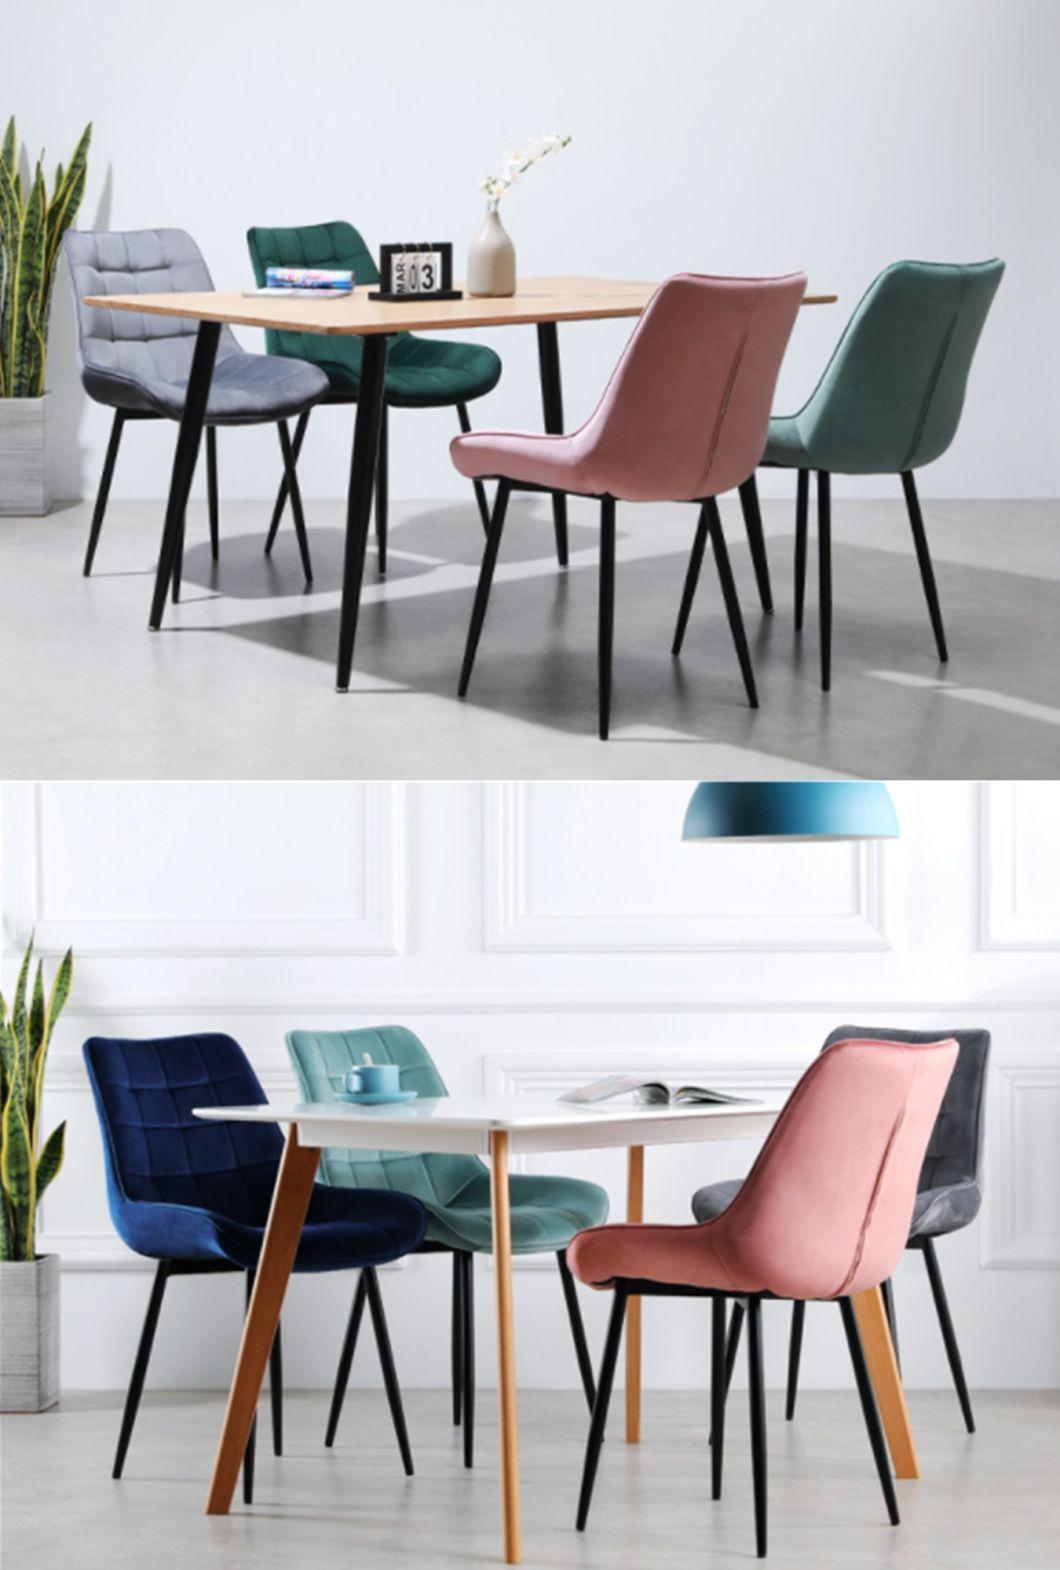 Factory Direct Beautiful Comfortable Upholstered Modern Low Back Steel Dining Chair